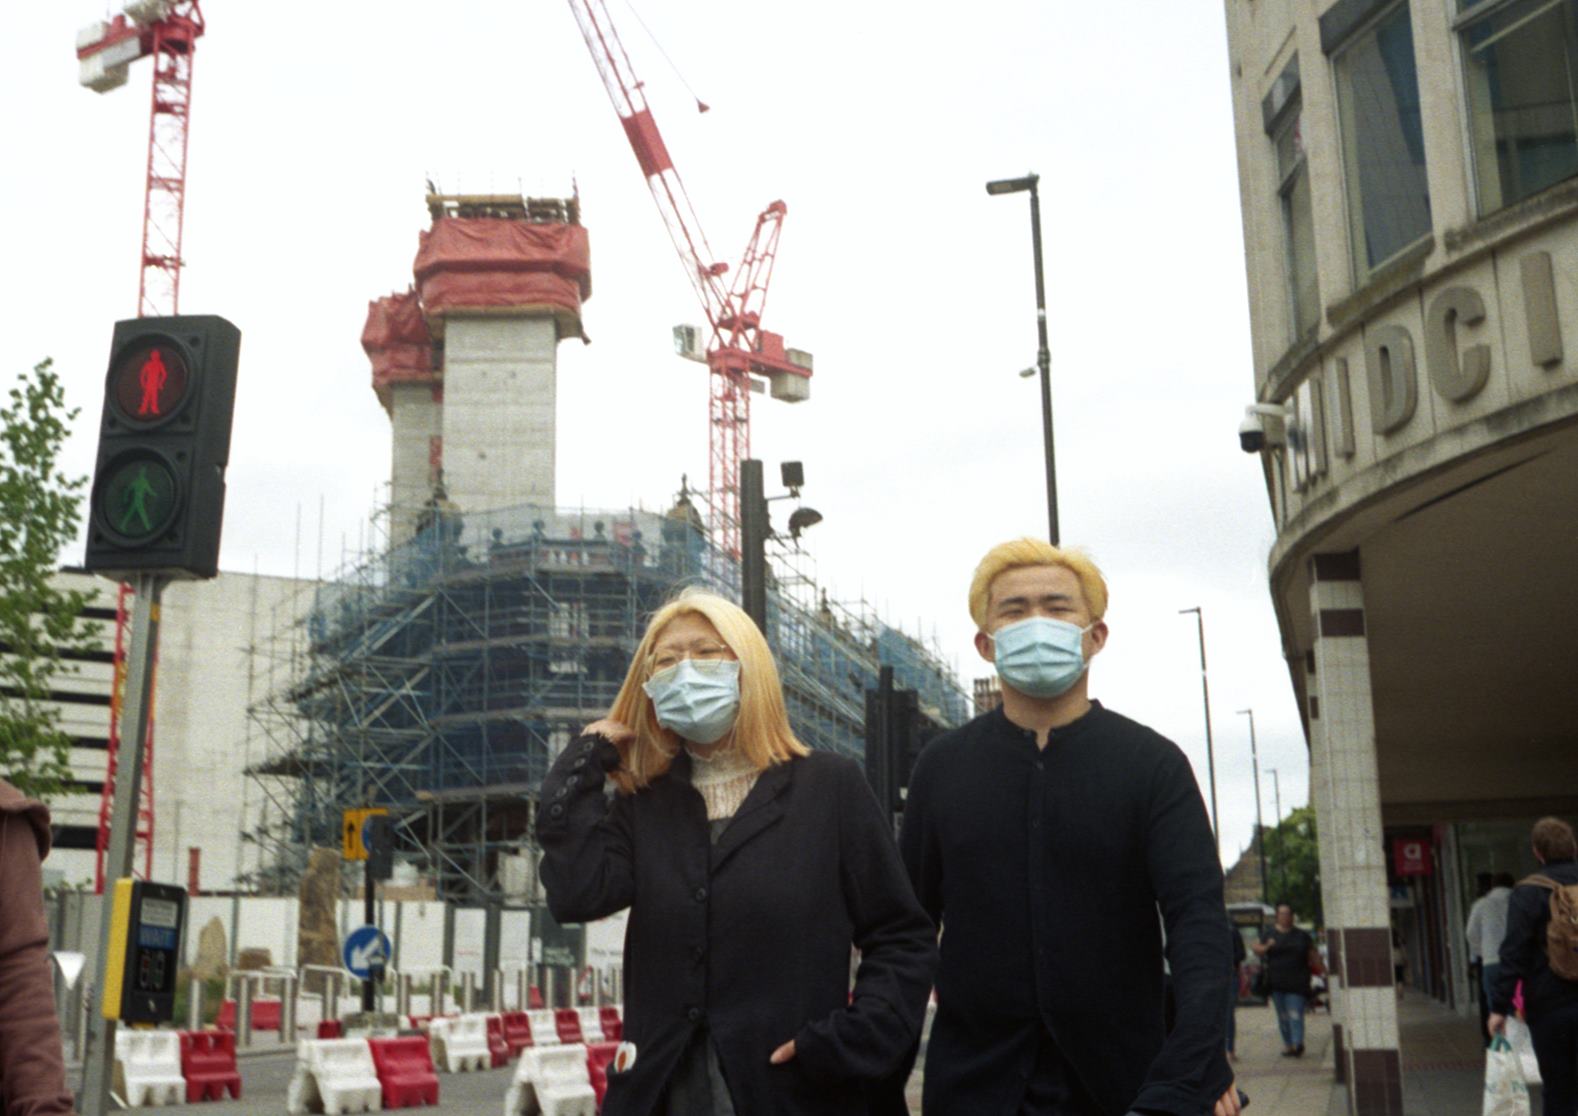 two people with matching dyed blonde hair and surgical masks